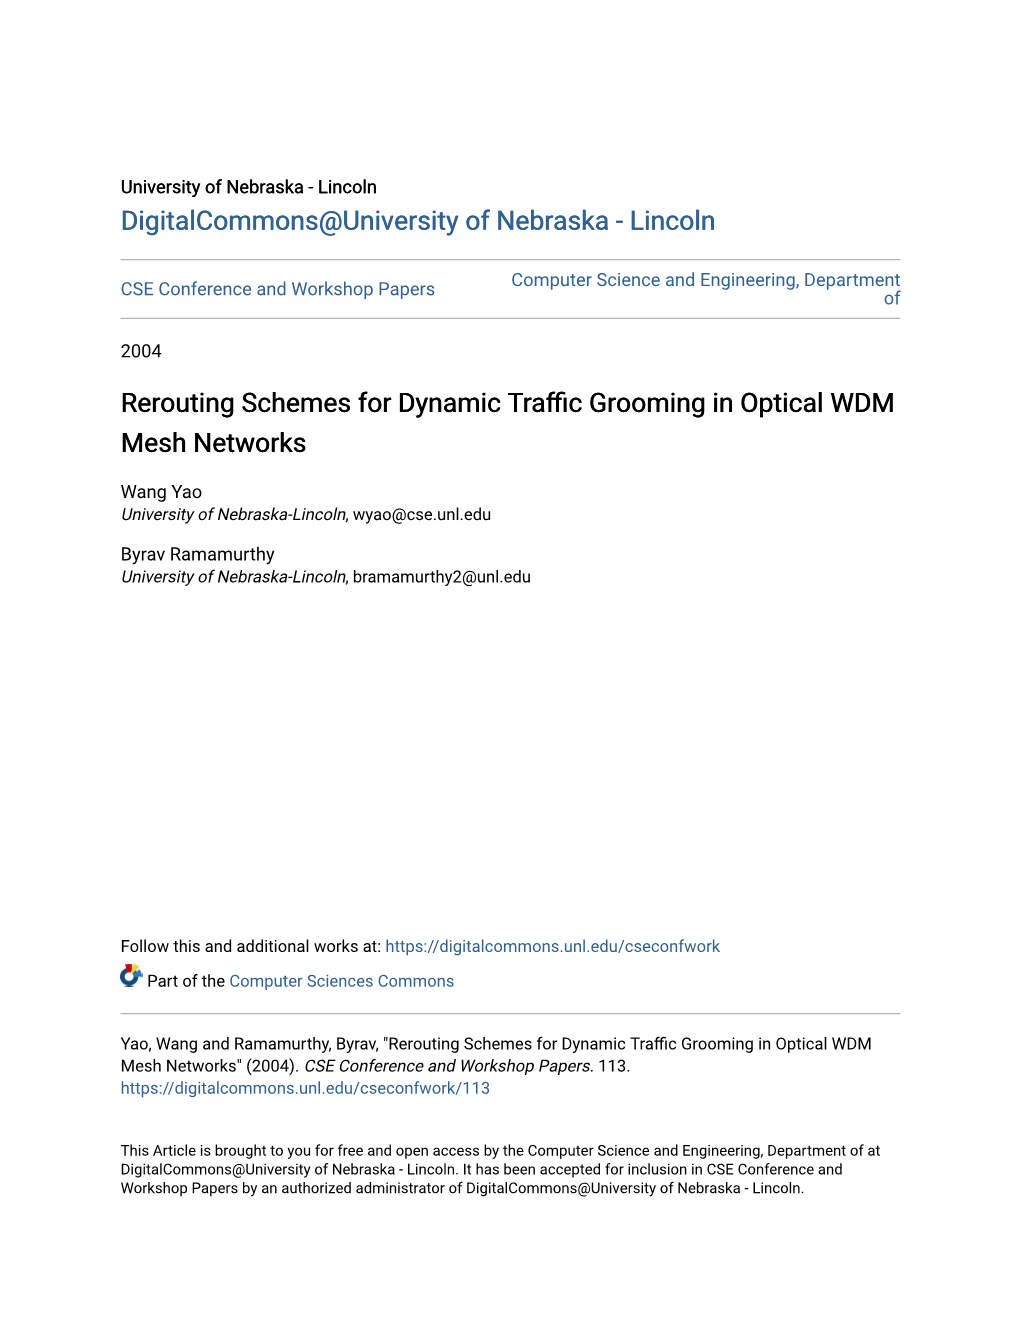 Rerouting Schemes for Dynamic Traffic Grooming in Optical WDM Mesh Networks